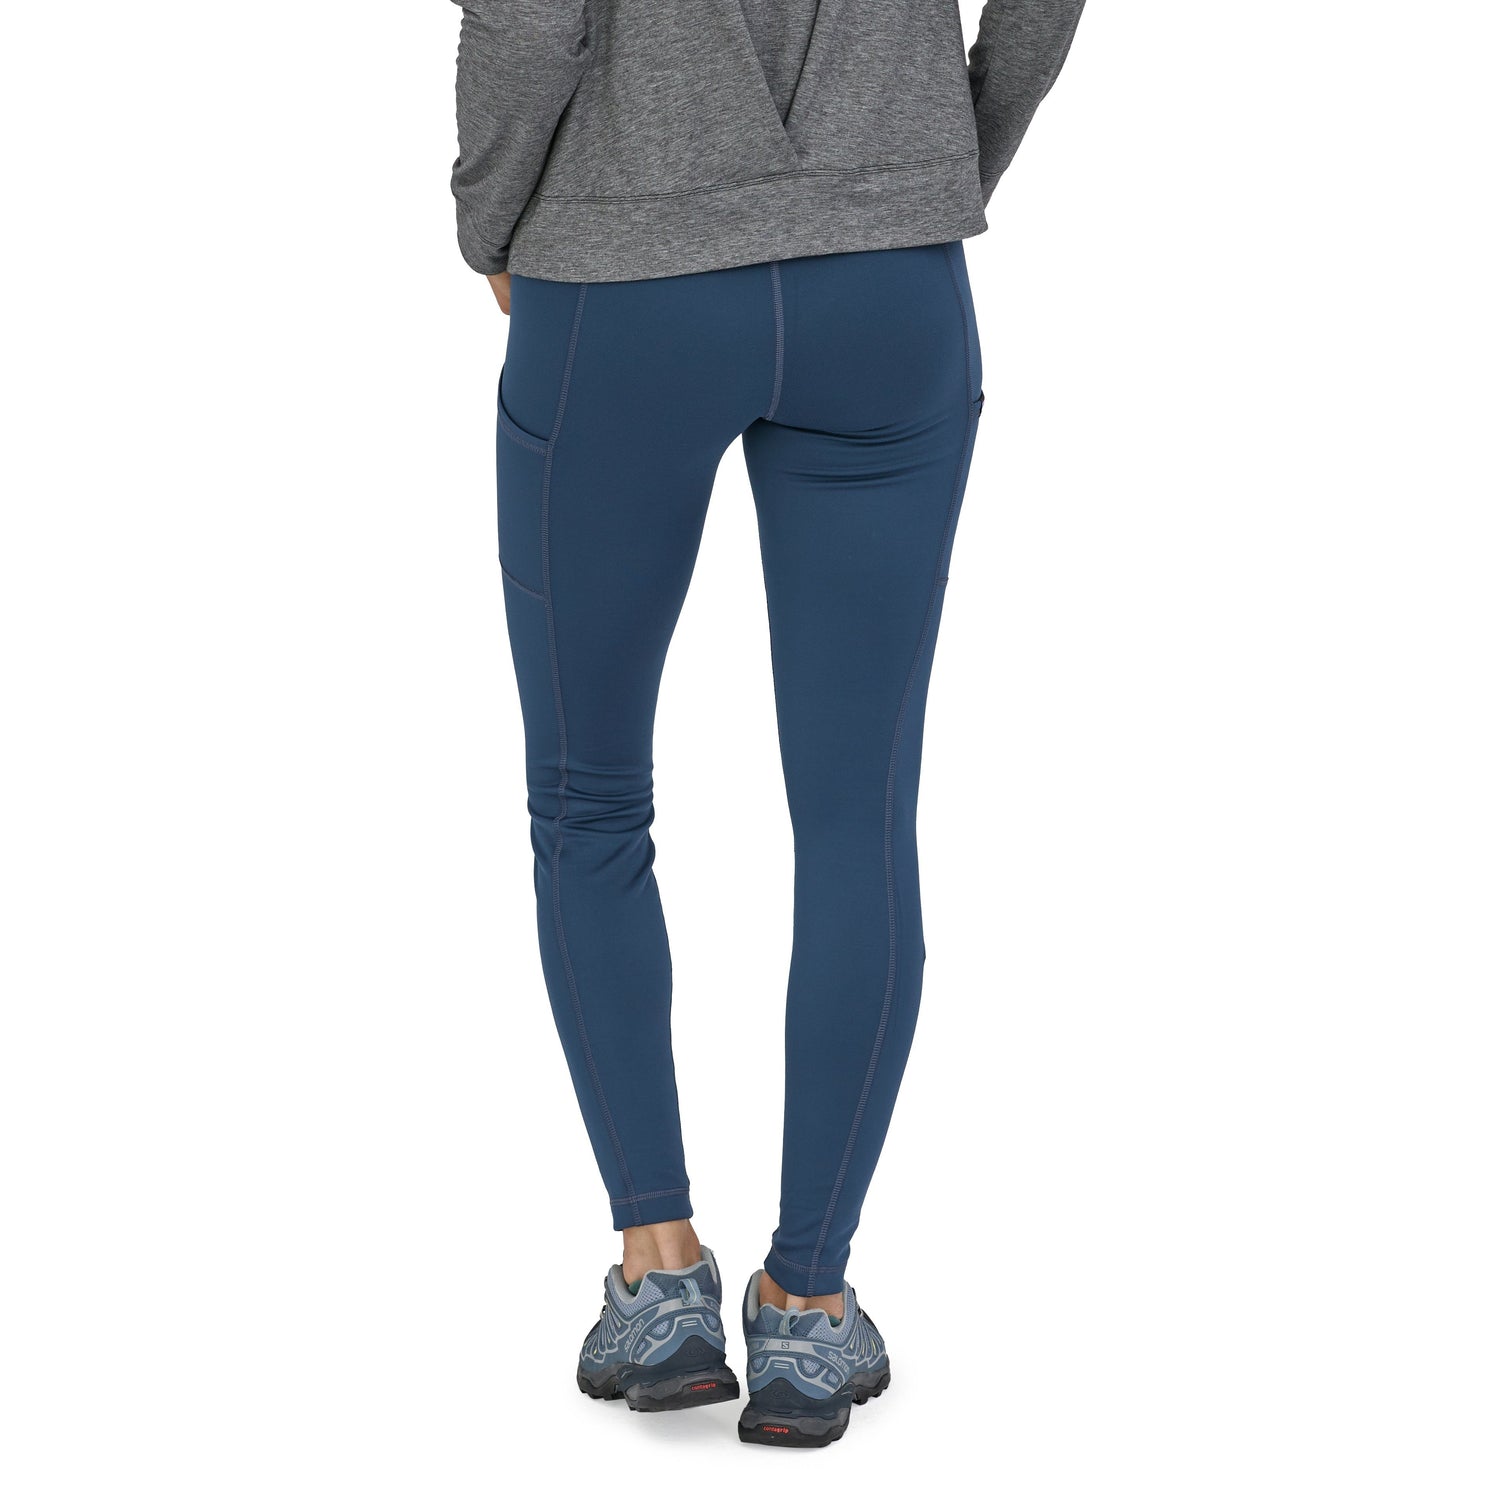 Patagonia W's Pack Out Tights - Bluesign® approved Polyester Tidepool Blue Pants